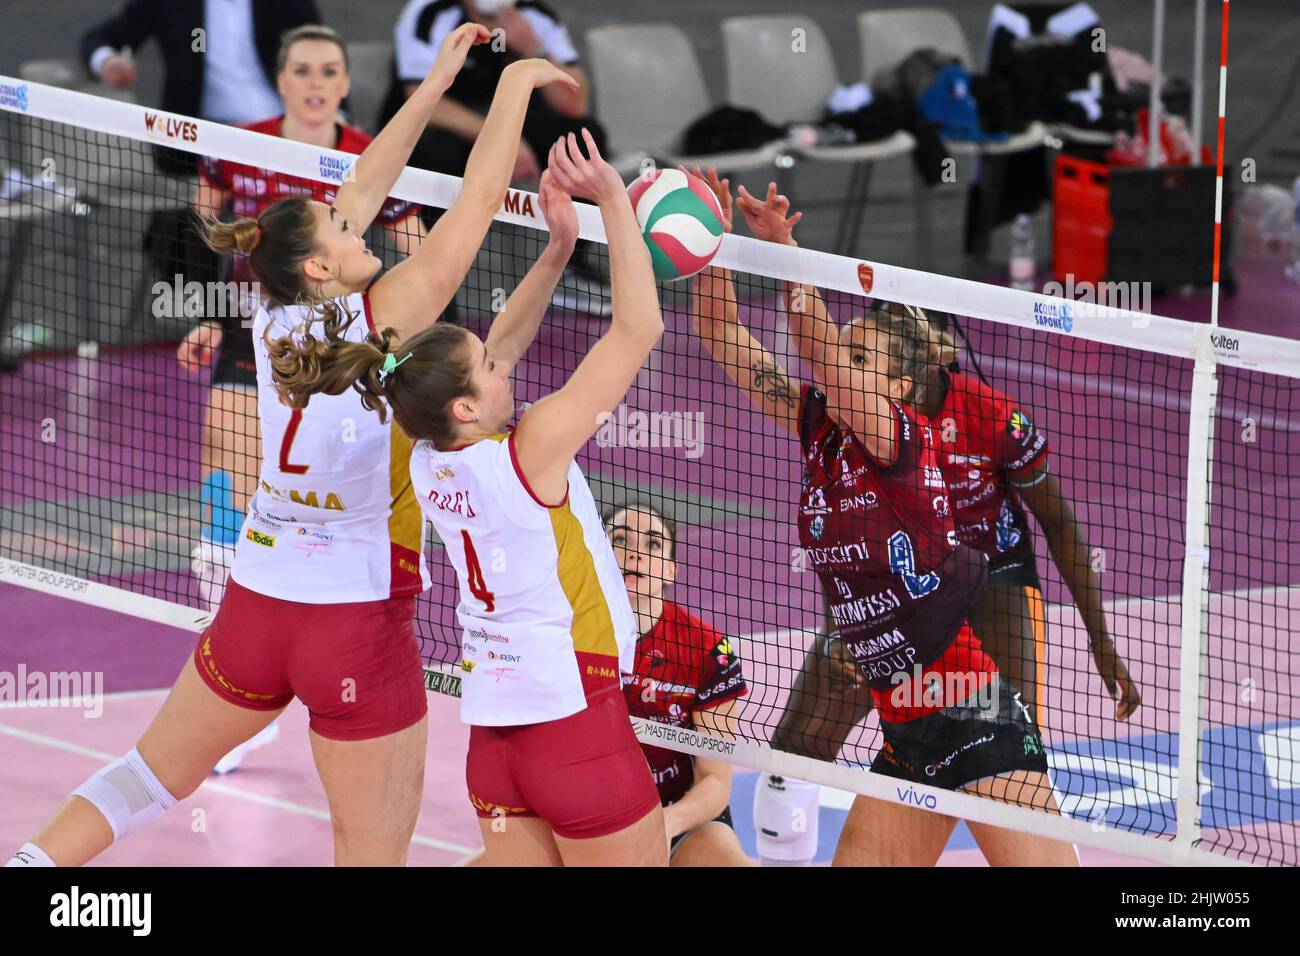 Rome, Italy. 30th Jan, 2022. Bugg Madison of Acqua & Sapone Roma Volley  during the Women's Volleyball Championship Series A1 match between Acqua &  Sapone Volley Roma and Bartoccini Fortinfissi Perugia Volley